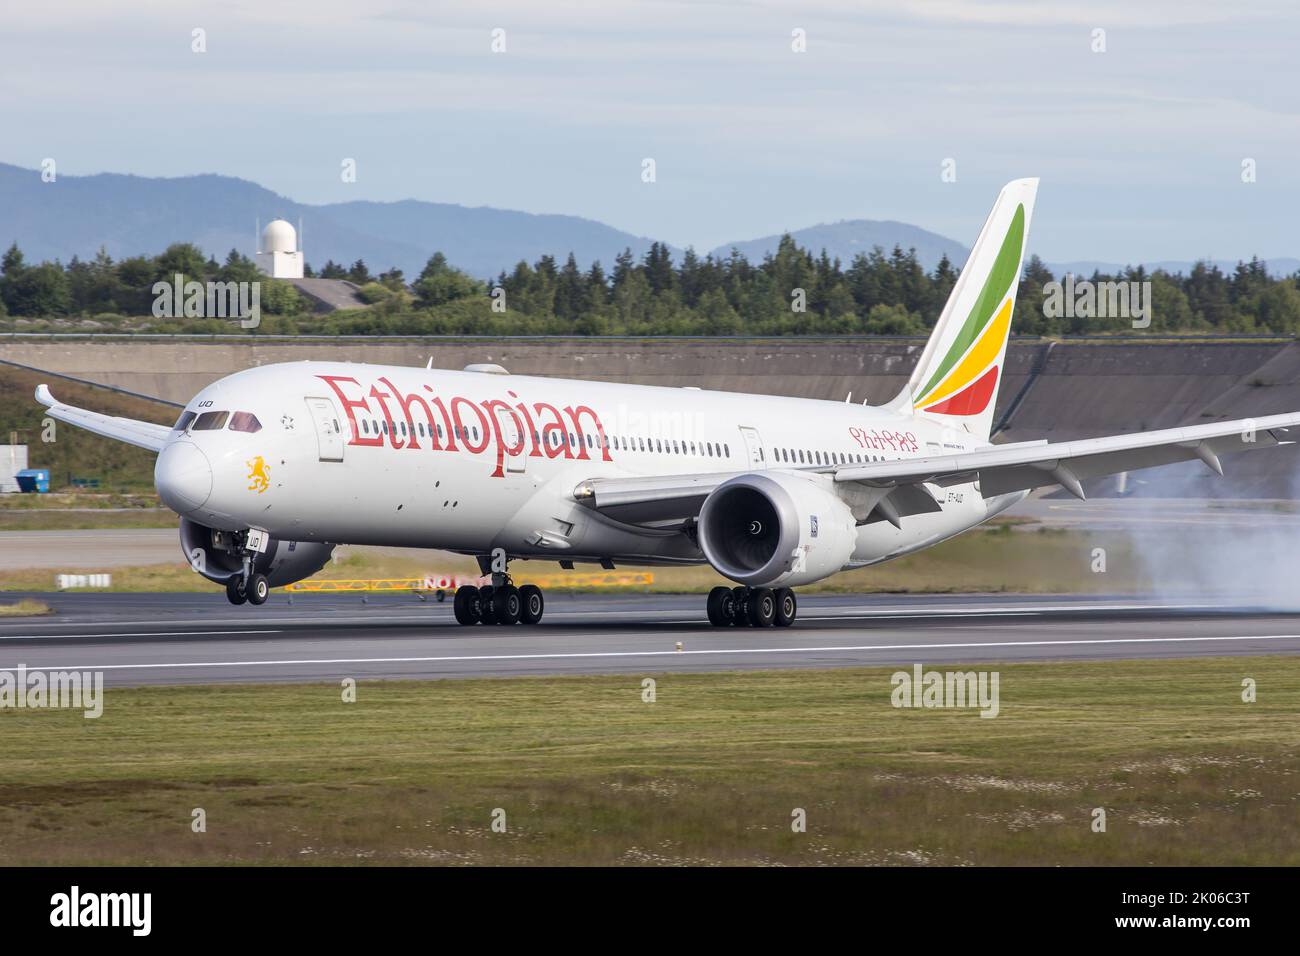 An Ethiopian Airlines Boeing 787-9 Dreamliner aircraft landing in Oslo in Norway Stock Photo